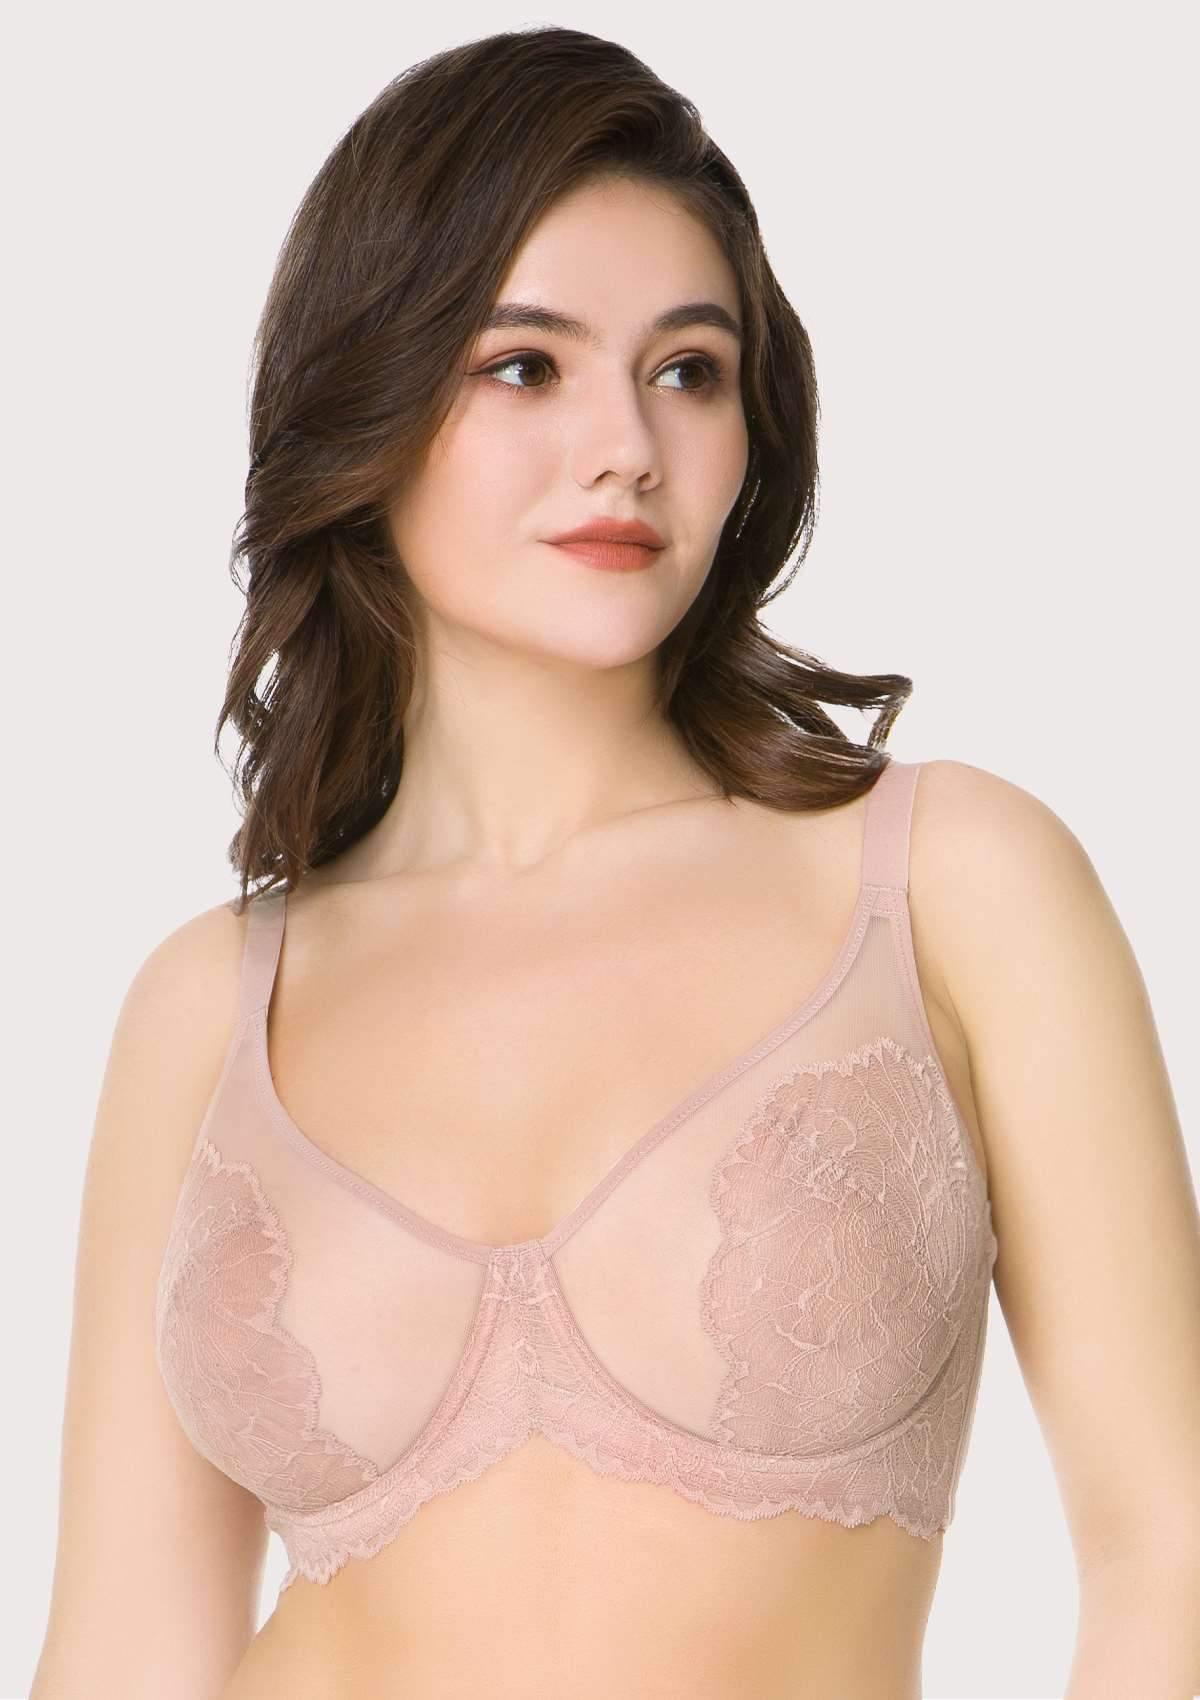 HSIA Blossom Lace Bra And Panties Set: Best Bra For Large Busts - Dark Pink / 38 / DDD/F